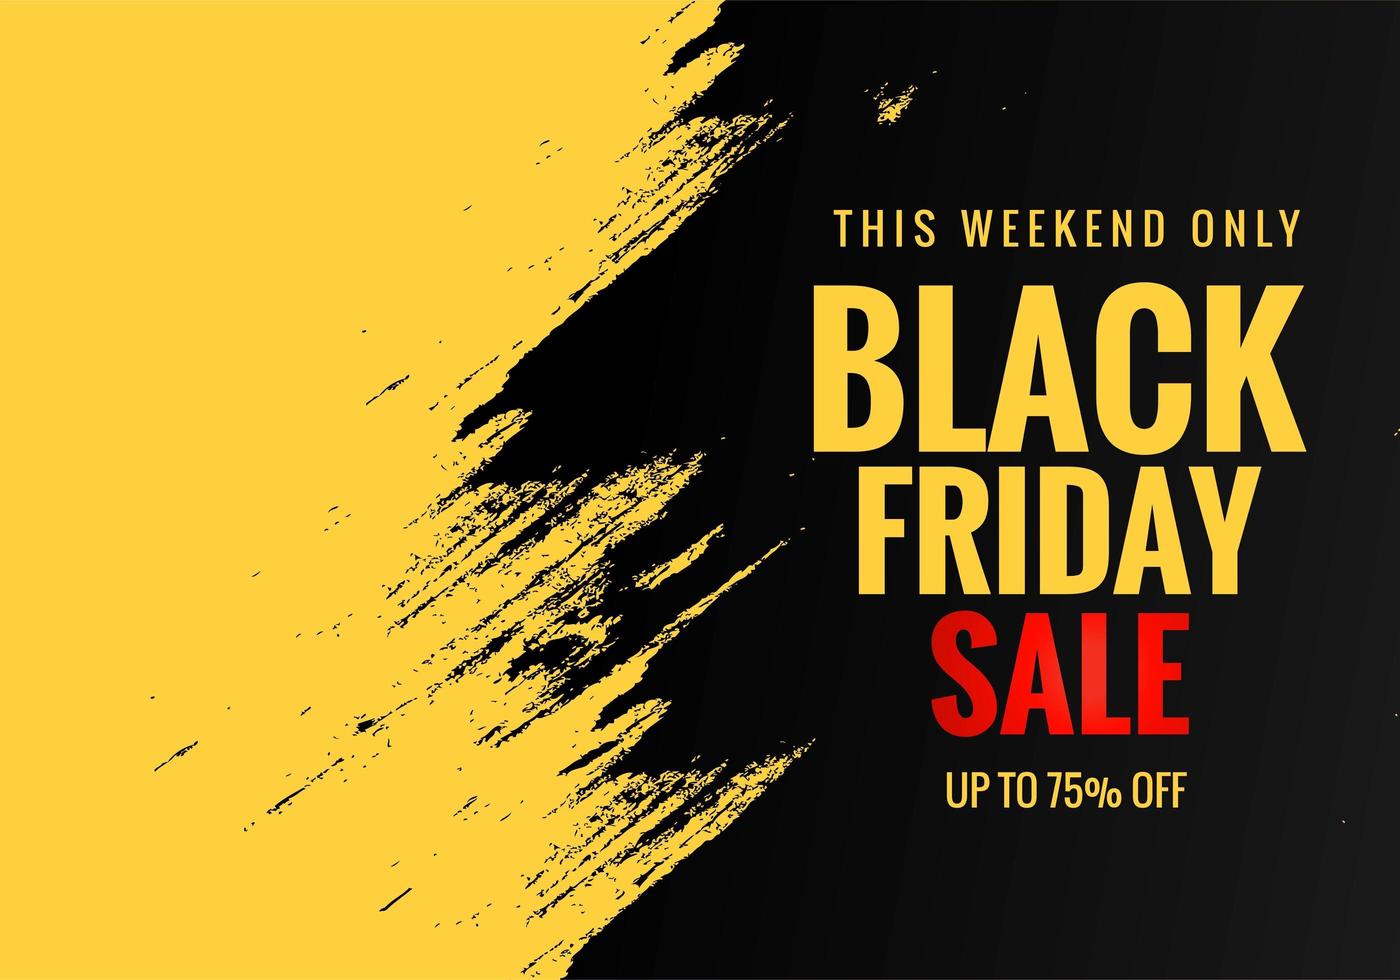 Black Friday Sale Poster with grunge background vector